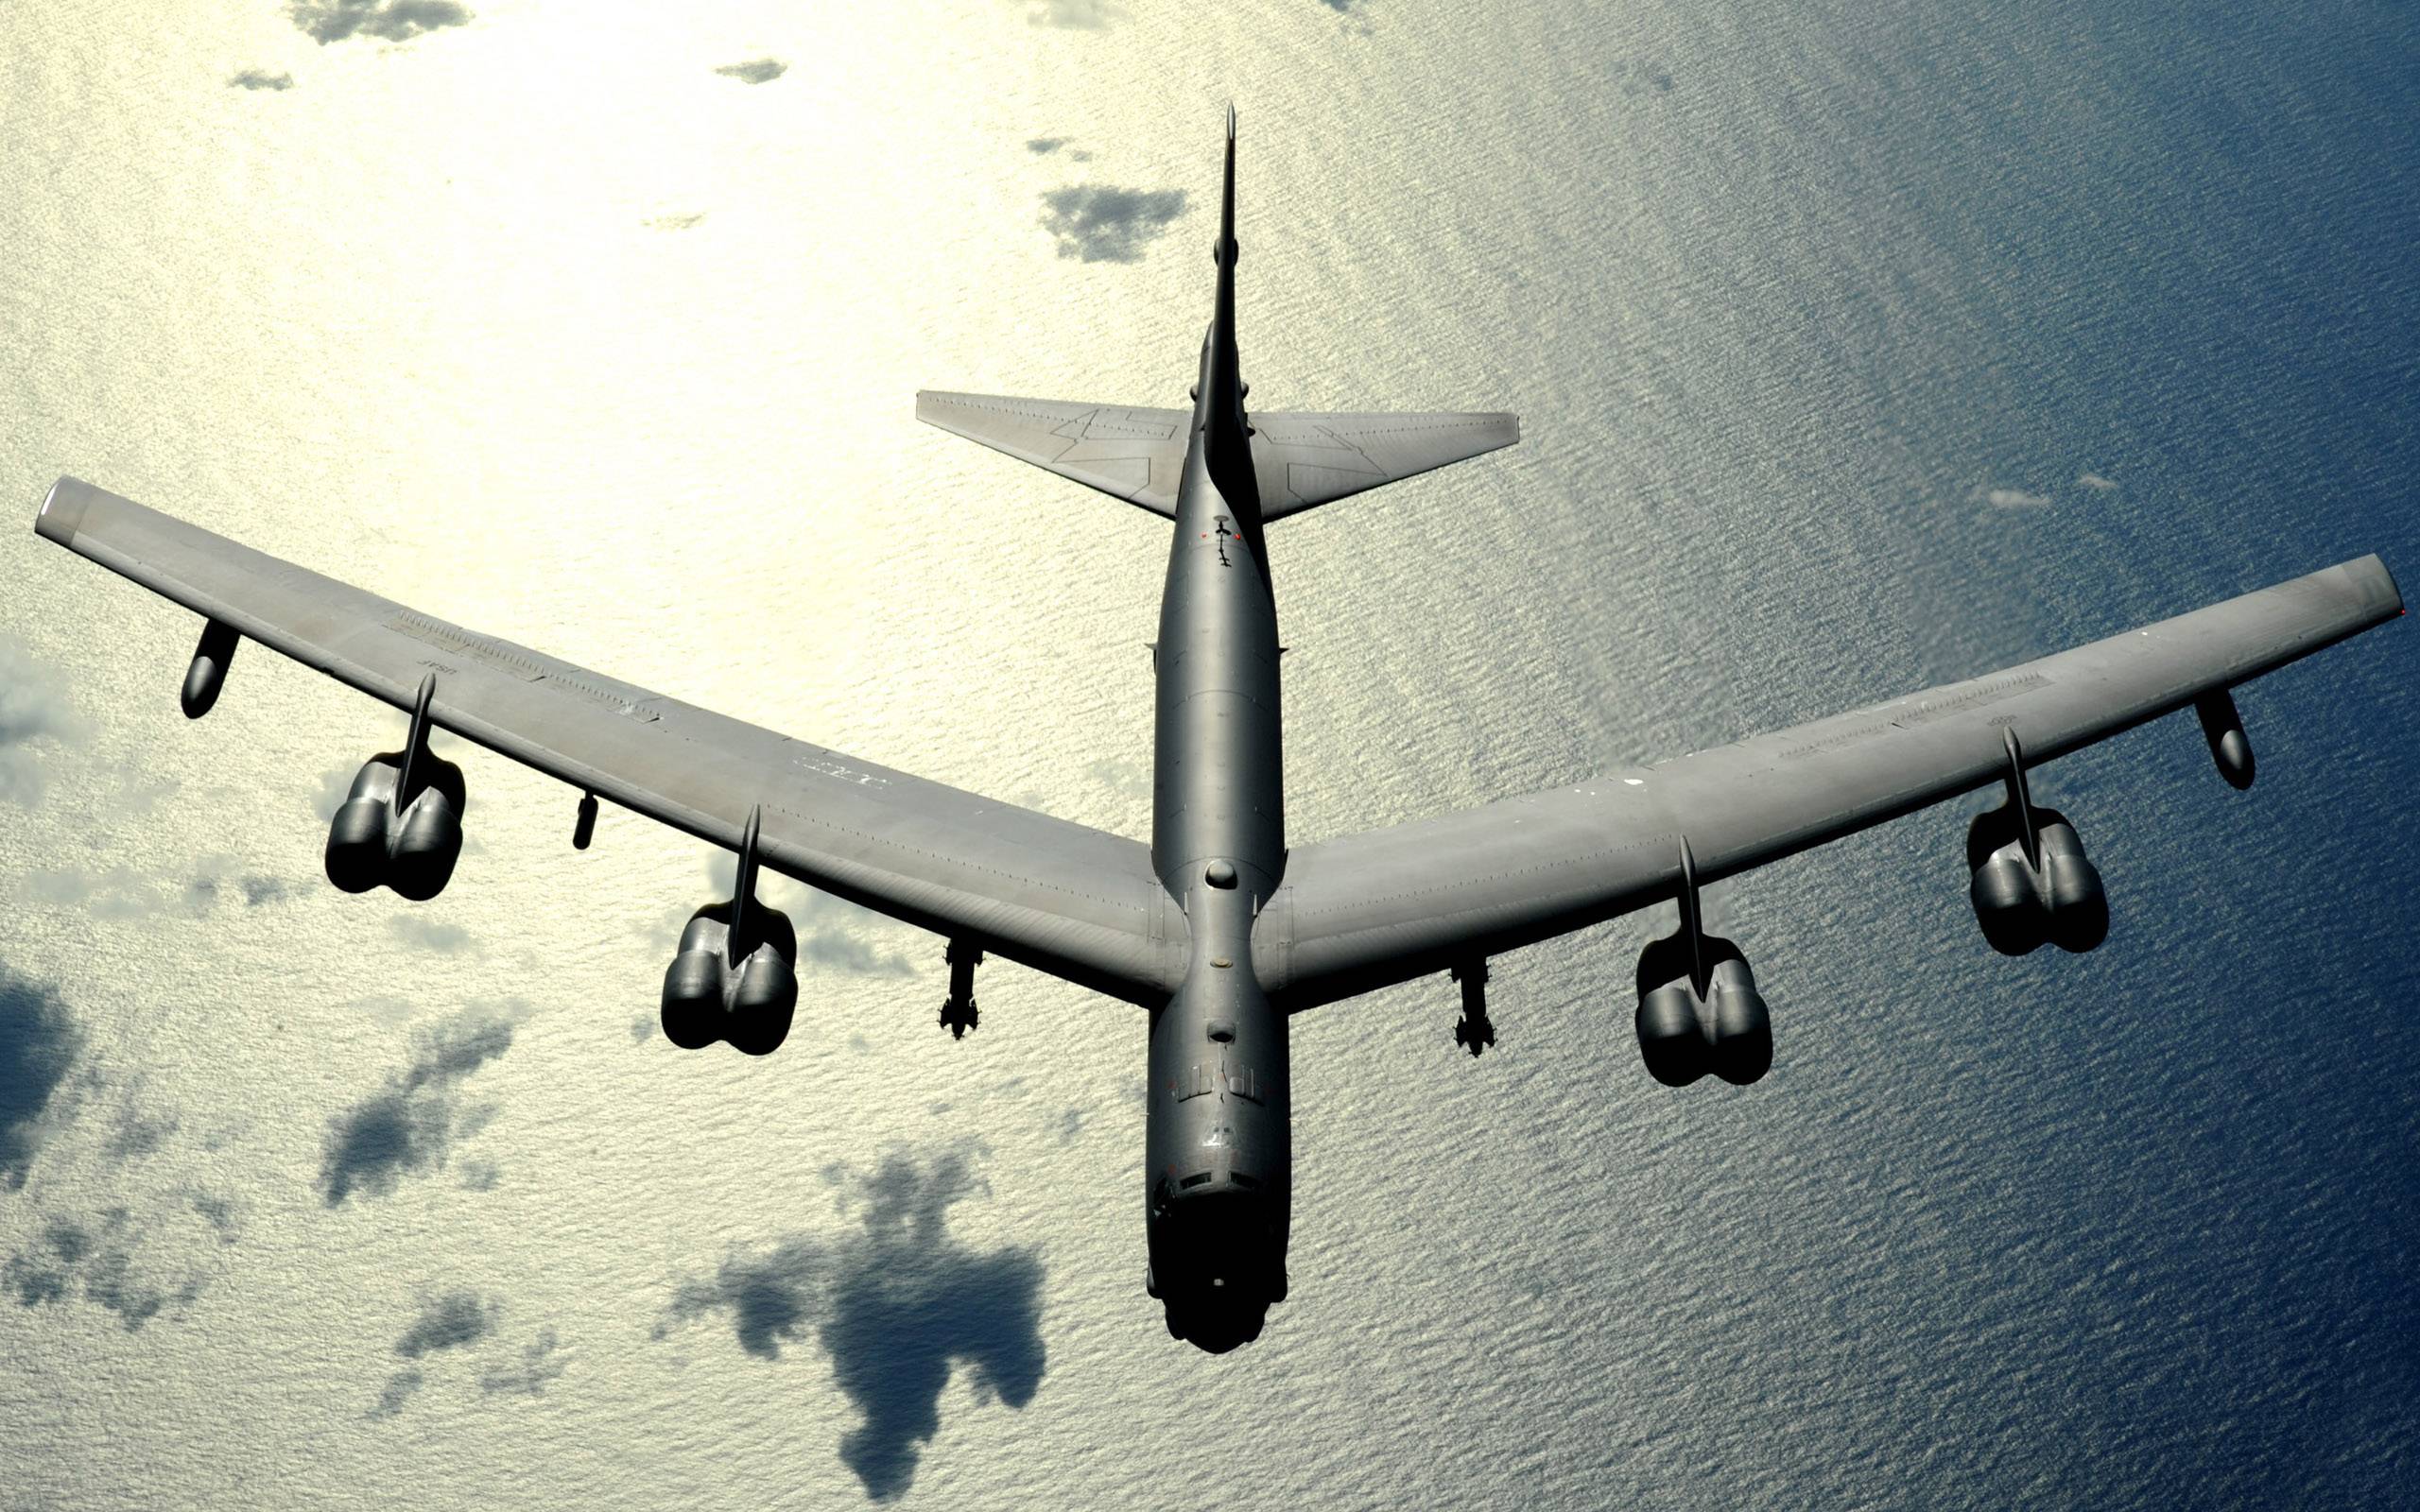 Download wallpaper 800x1200 boeing b17 flying fortress bomber sky  clouds iphone 4s4 for parallax hd background